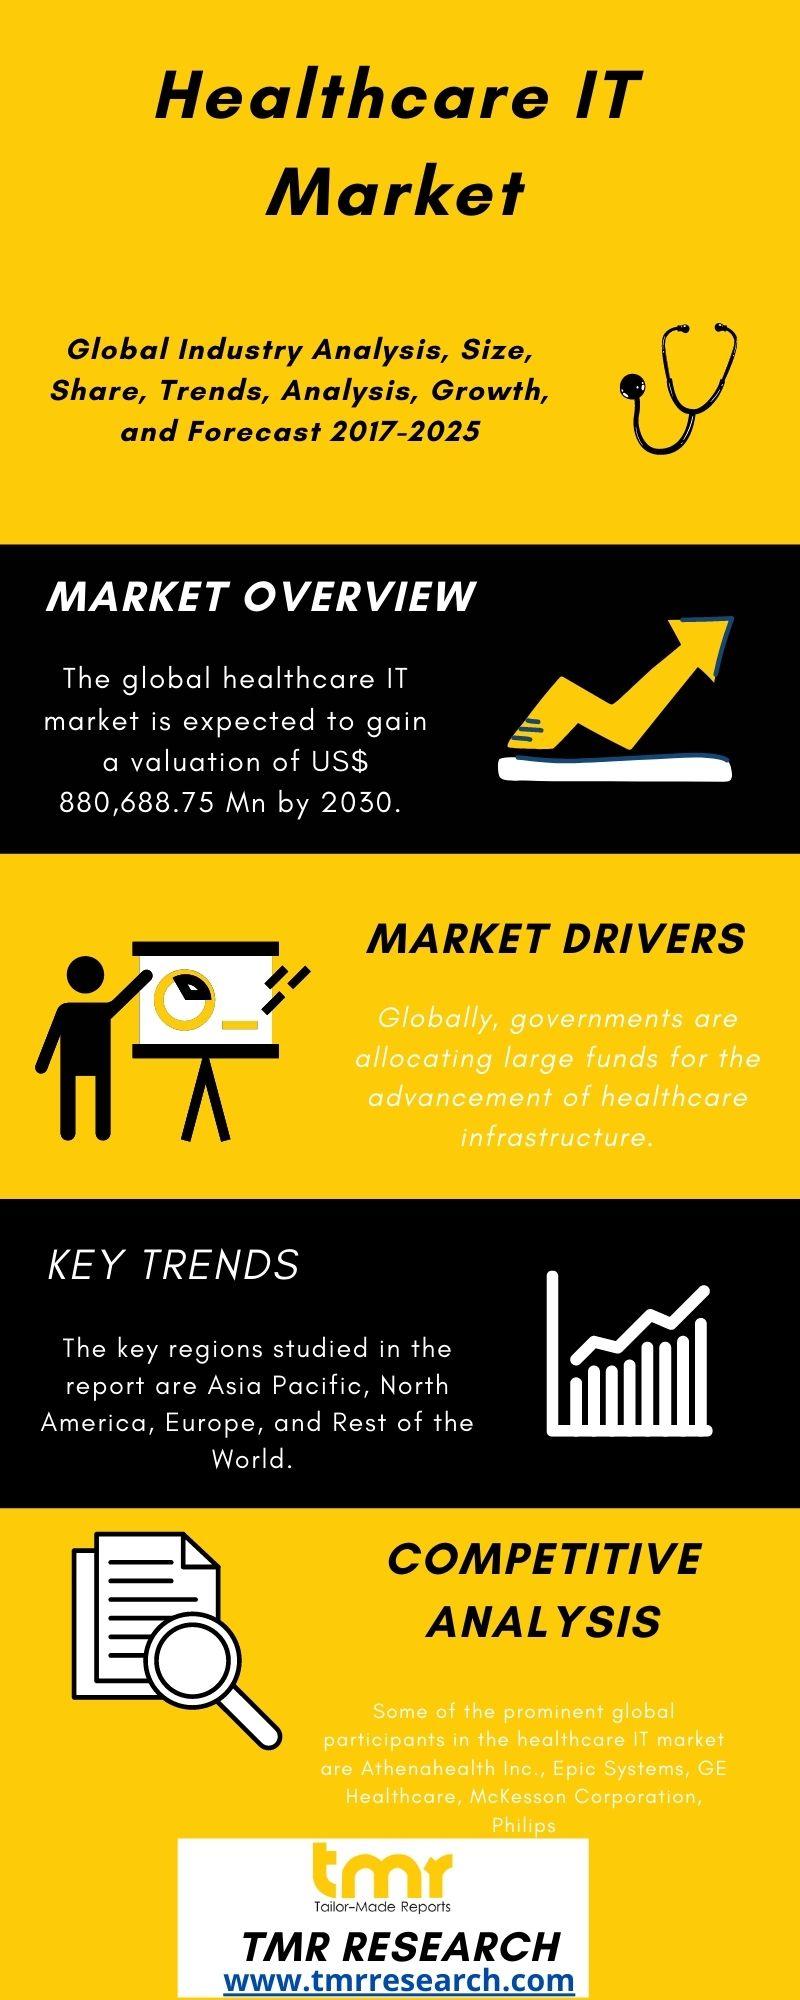 Healthcare IT Market Research Insights, Growth, Size, Industry